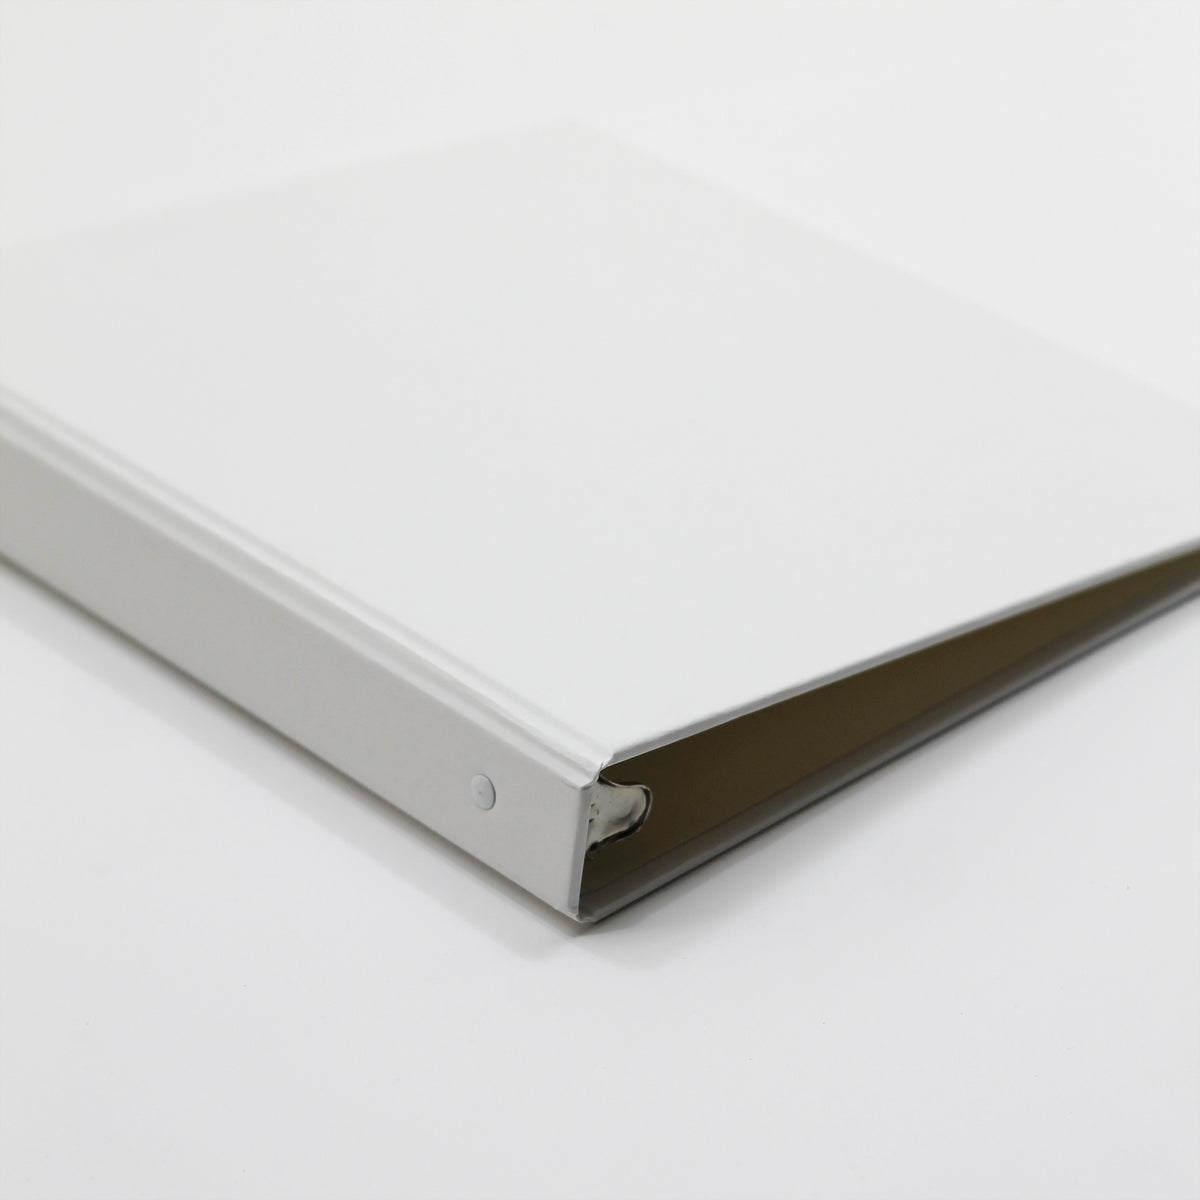 Storage Binder for Photos or Documents with White Vegan Leather Cover